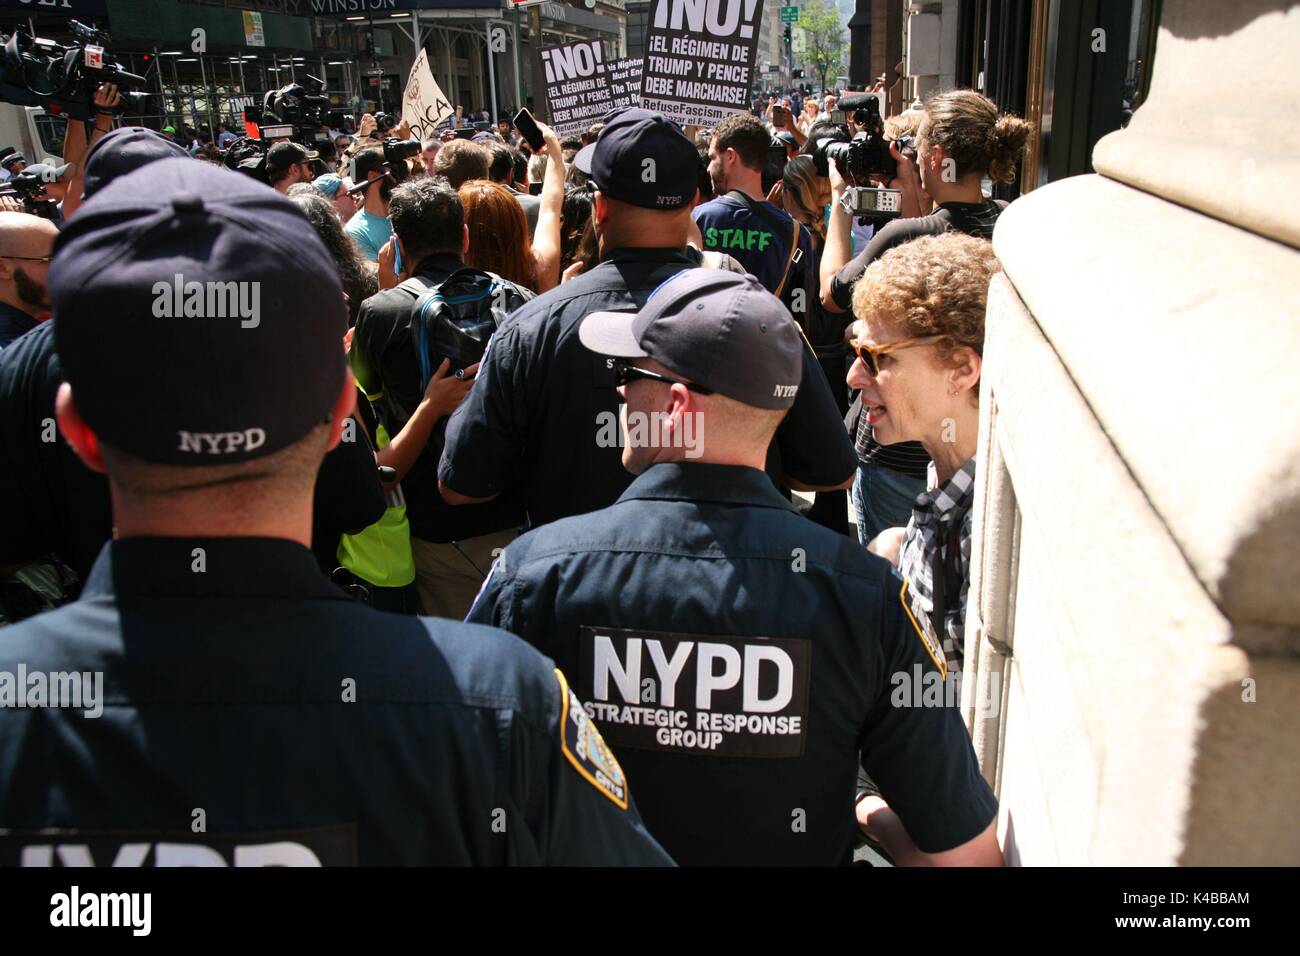 New York, Us. 05th Sep, 2017. Hundreds of immigrants who came to the USA illegally as children gathered outside Trump Tower on 5th September, 2017, to protest US President Donald Trump's decision to rescind the Deferred Action for Childhood Arrivals (DACA), a program designed to protect immigrants created by President Barack Obama in 2012. There were several arrests when demonstrators linked hands and formed a human chain that blocked traffic along 56th Street and Fifth Avenue in front of Trump Towers. Credit: G. Ronald Lopez /DigiPixsAgain.us/Alamy Live News Stock Photo